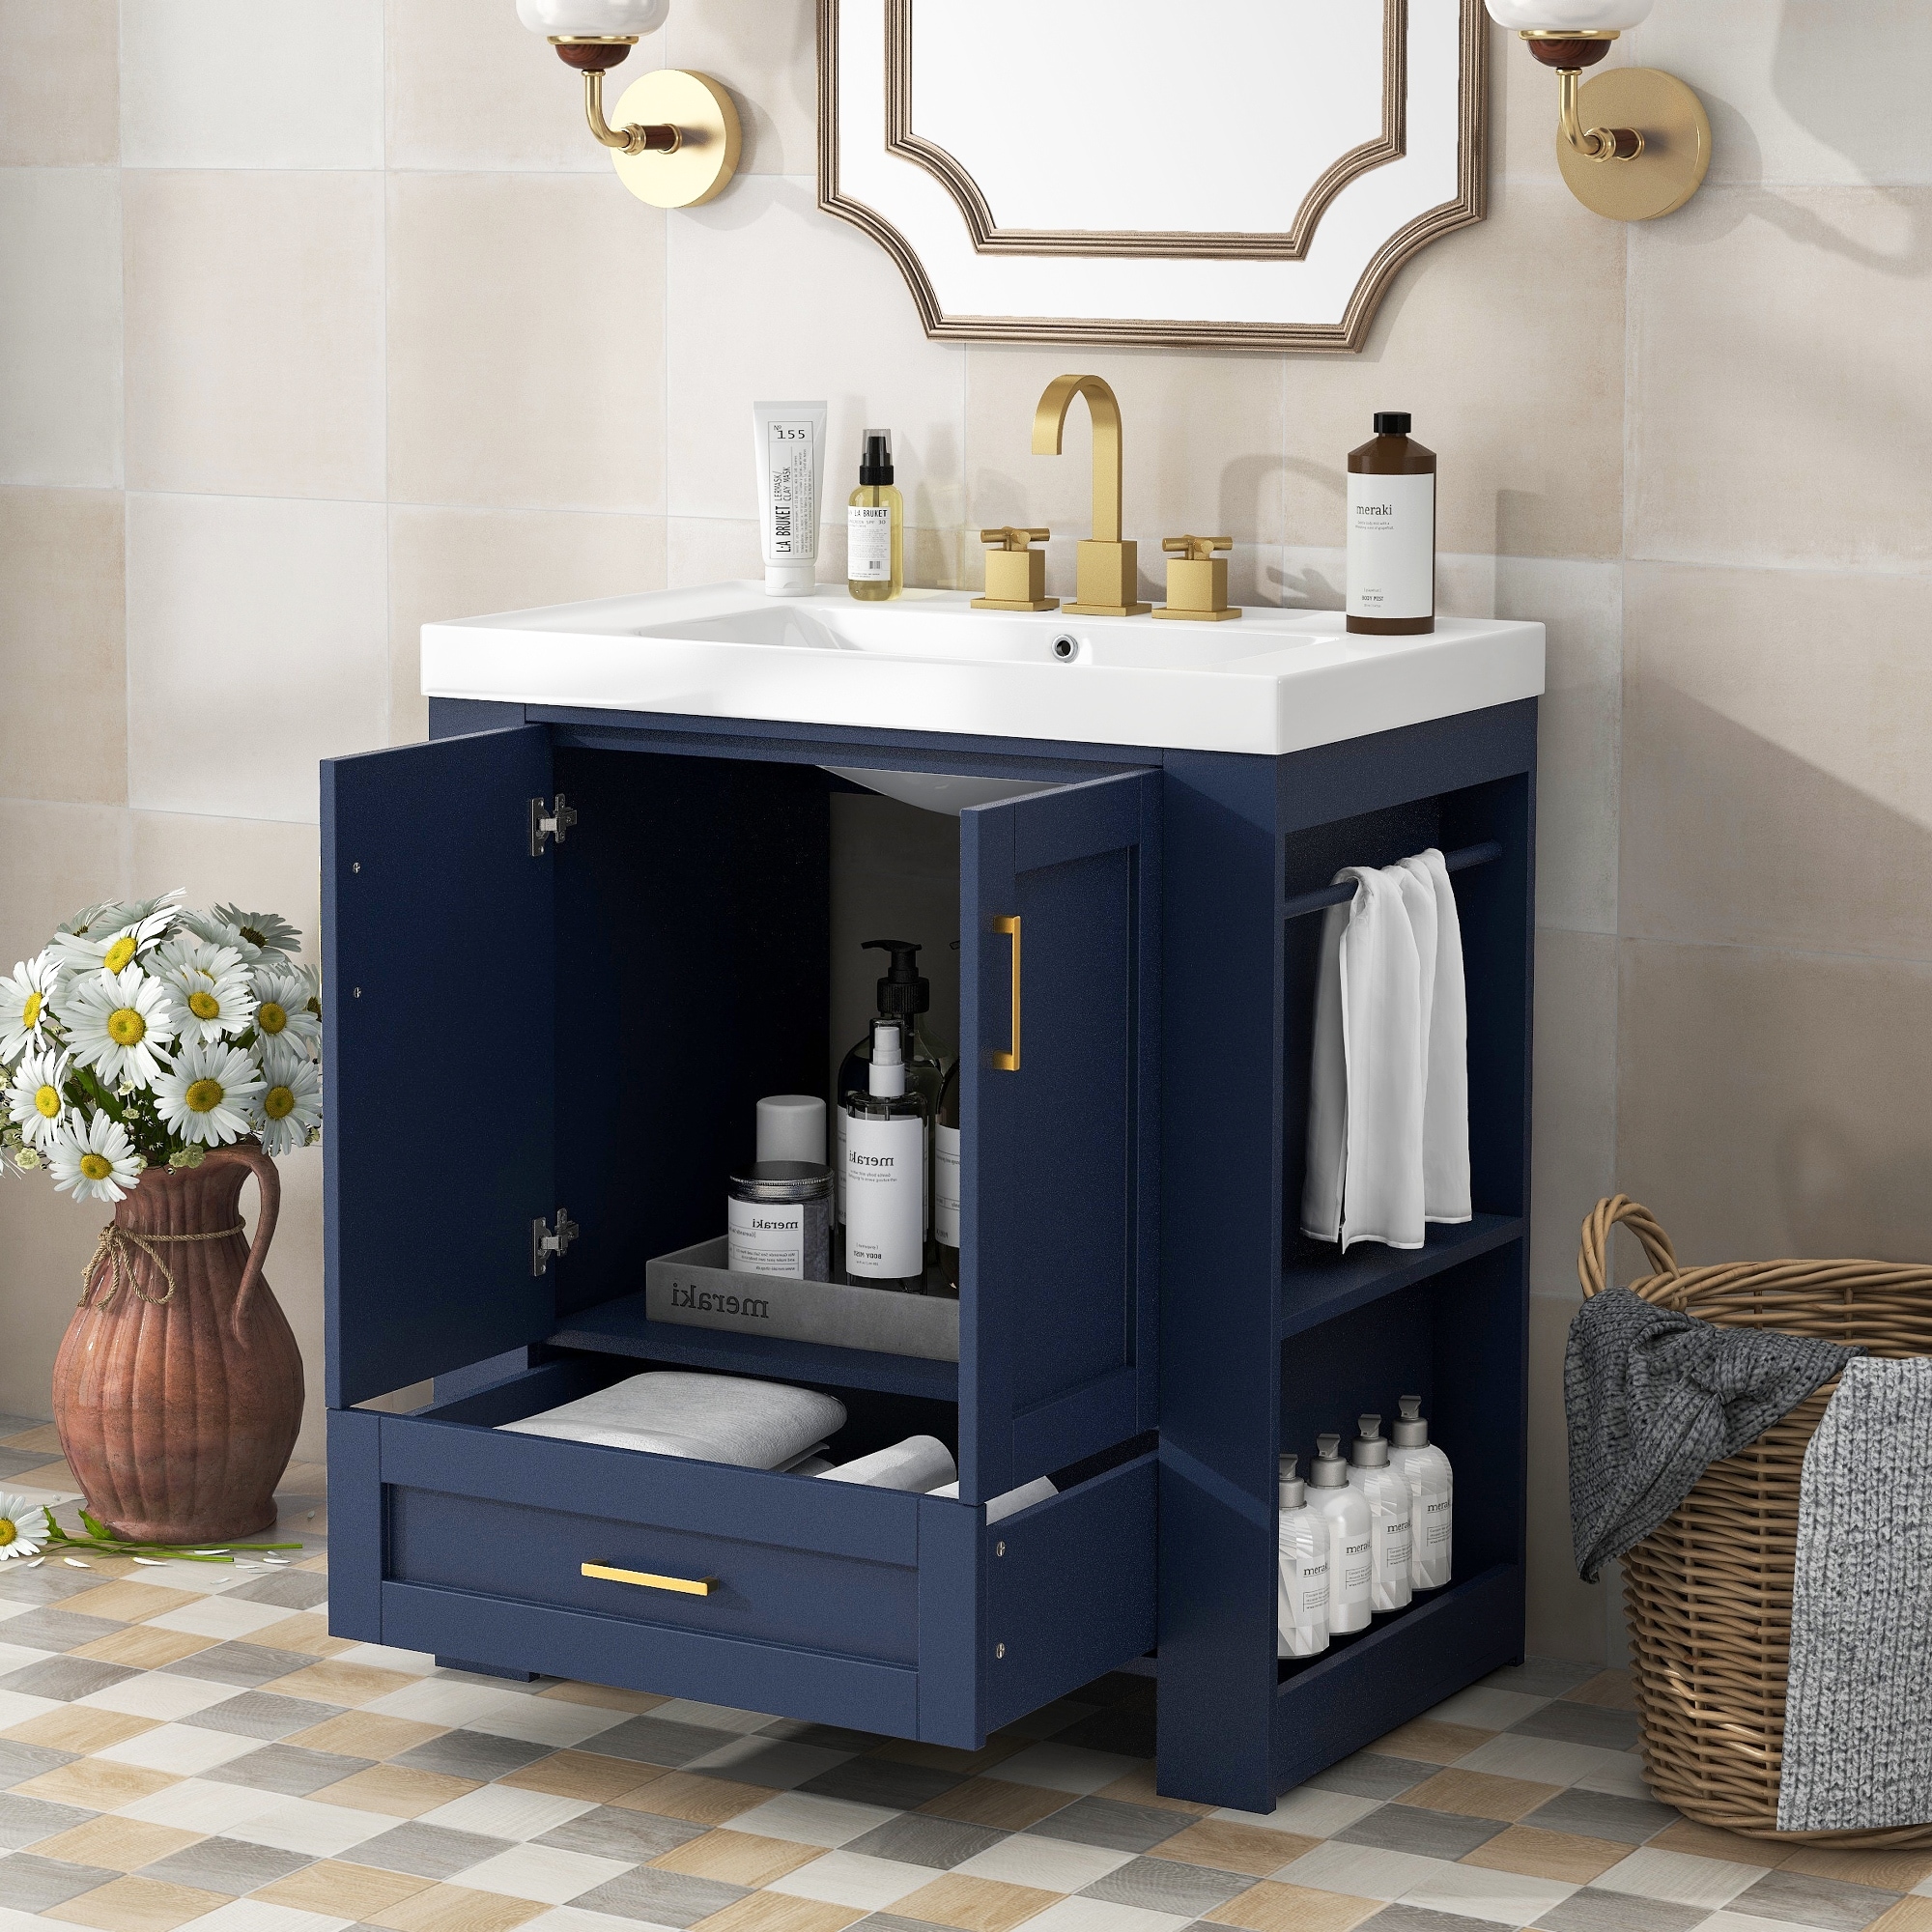 https://ak1.ostkcdn.com/images/products/is/images/direct/c22ee9fa8c12e80e0345c7771b1a1f07f28b772e/30%27%27-Bathroom-Vanity-with-Sink%2C-Modern-Bathroom-Cabinet-with-Towel-Rack%2C-Freestanding-Bathroom-Vanity-with-Drawer-and-Shelves.jpg